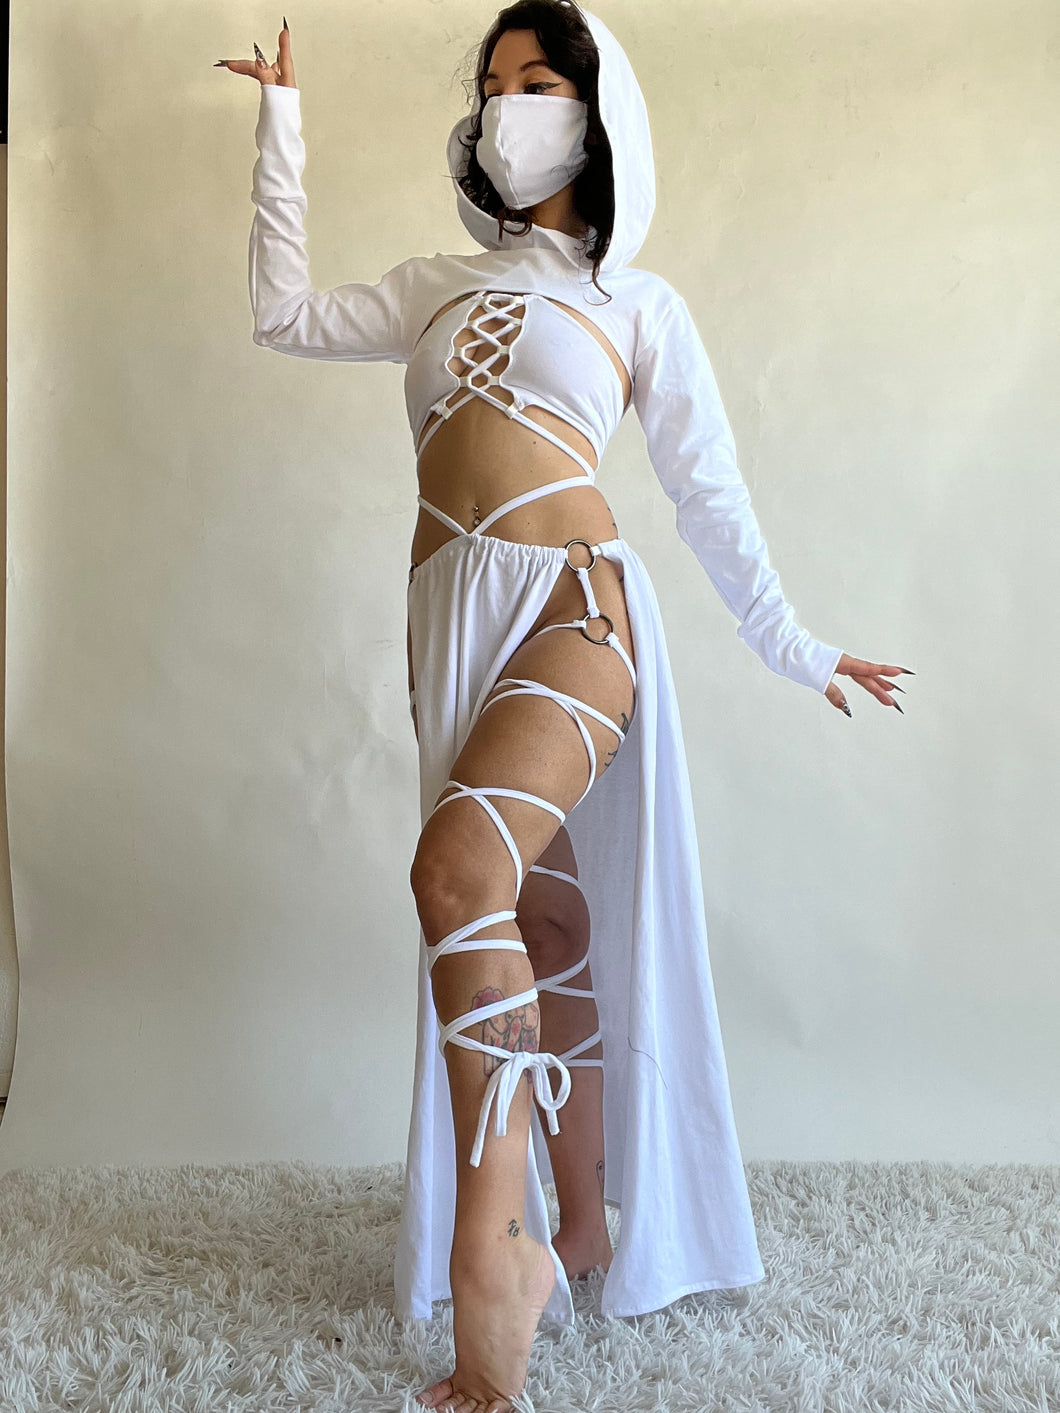 Serpentina Set in White Cotton - 5 pieces (Skirt, Top, Hooded Shrug, Mask and Gloves) - Fire Safe Bellydance Costume